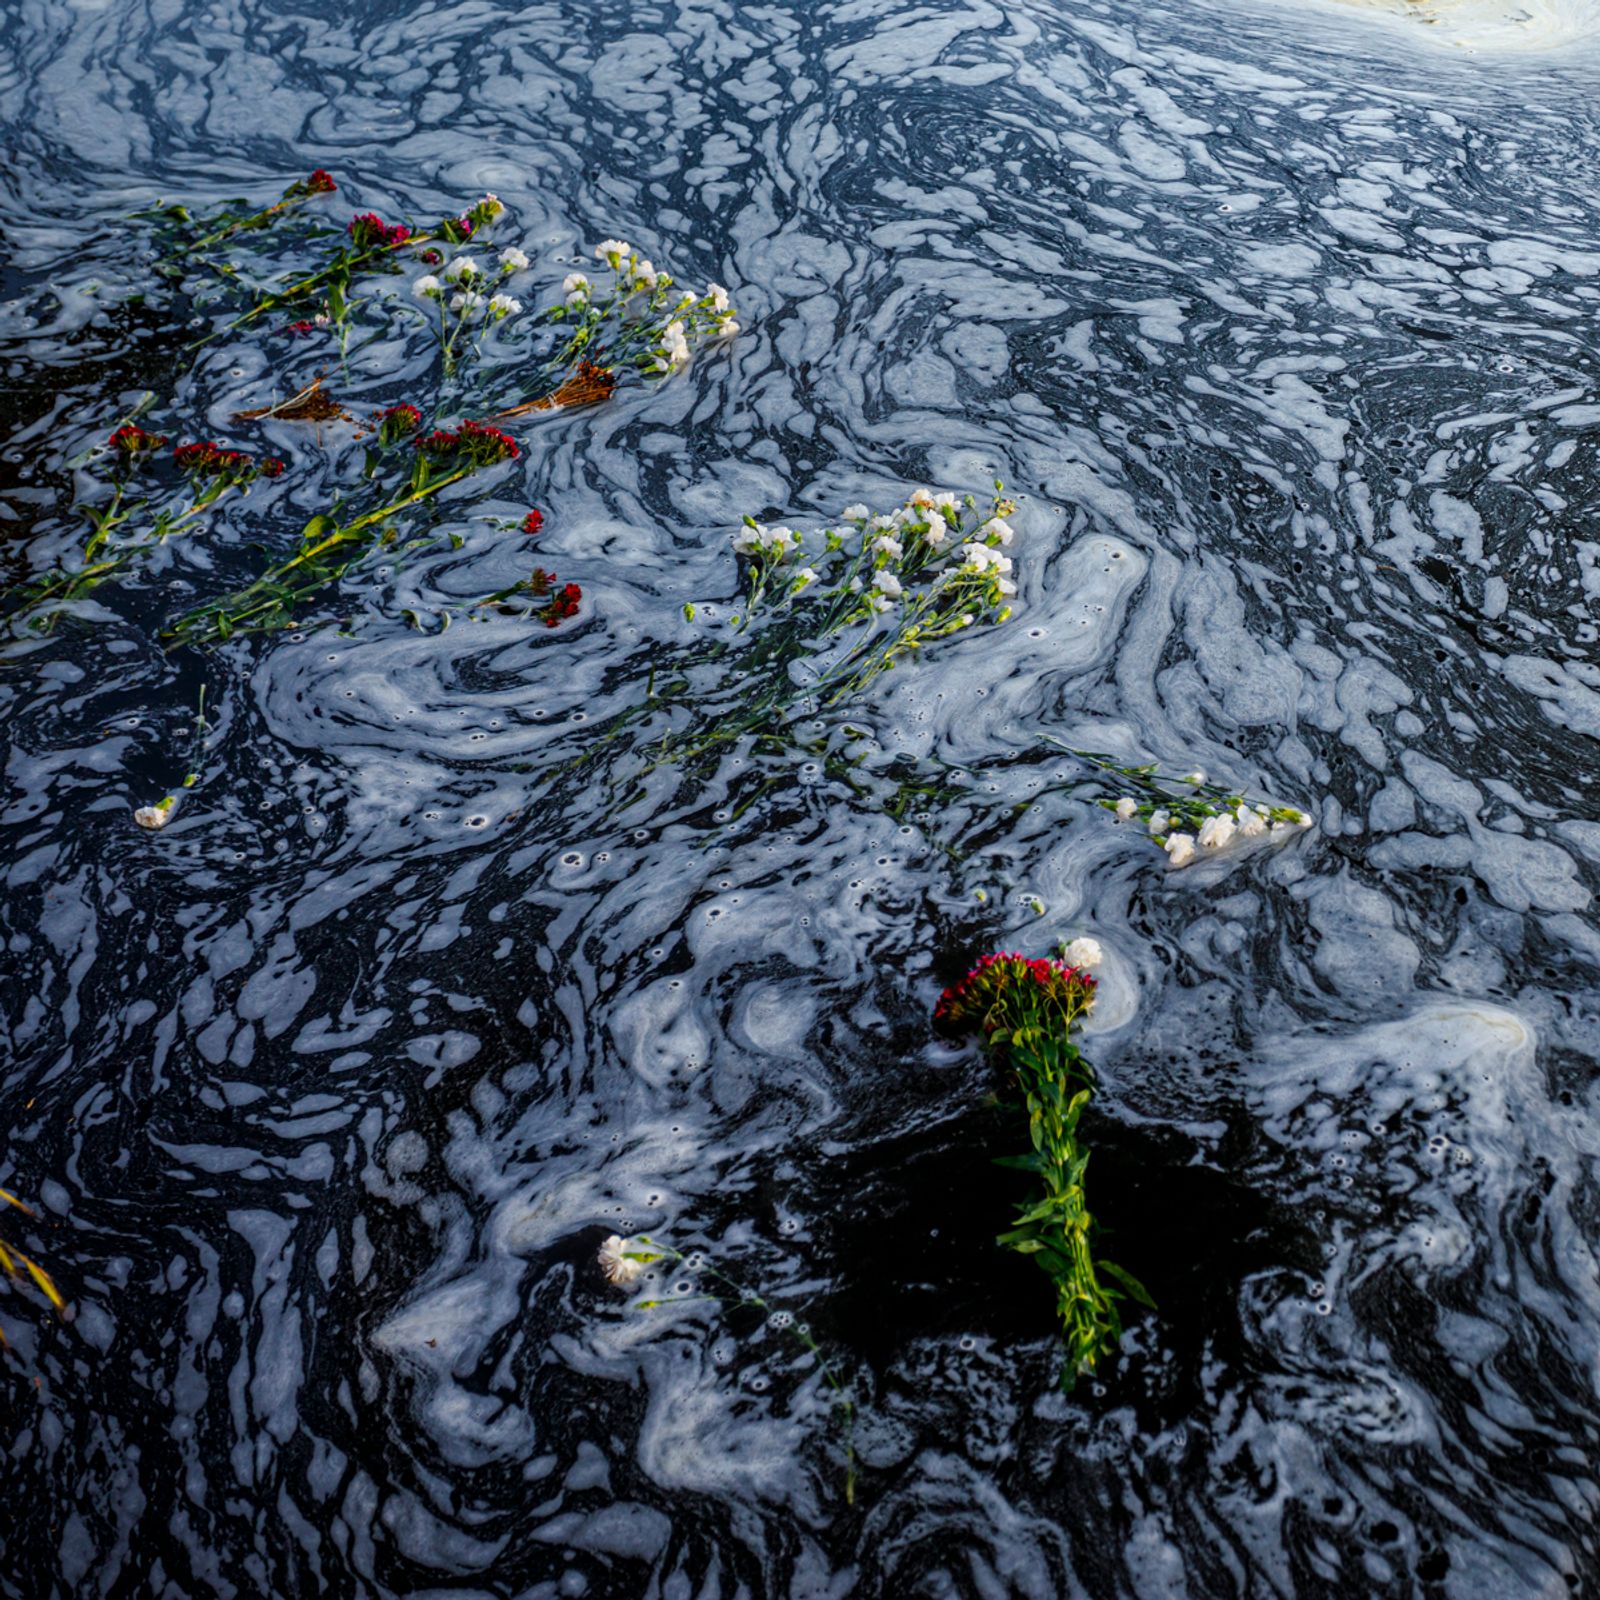 © Johanna Maria Fritz - Flowers to be thrown into the river Chitila during a witches’ ritual. Mogoșoaia, Romania, 2019.